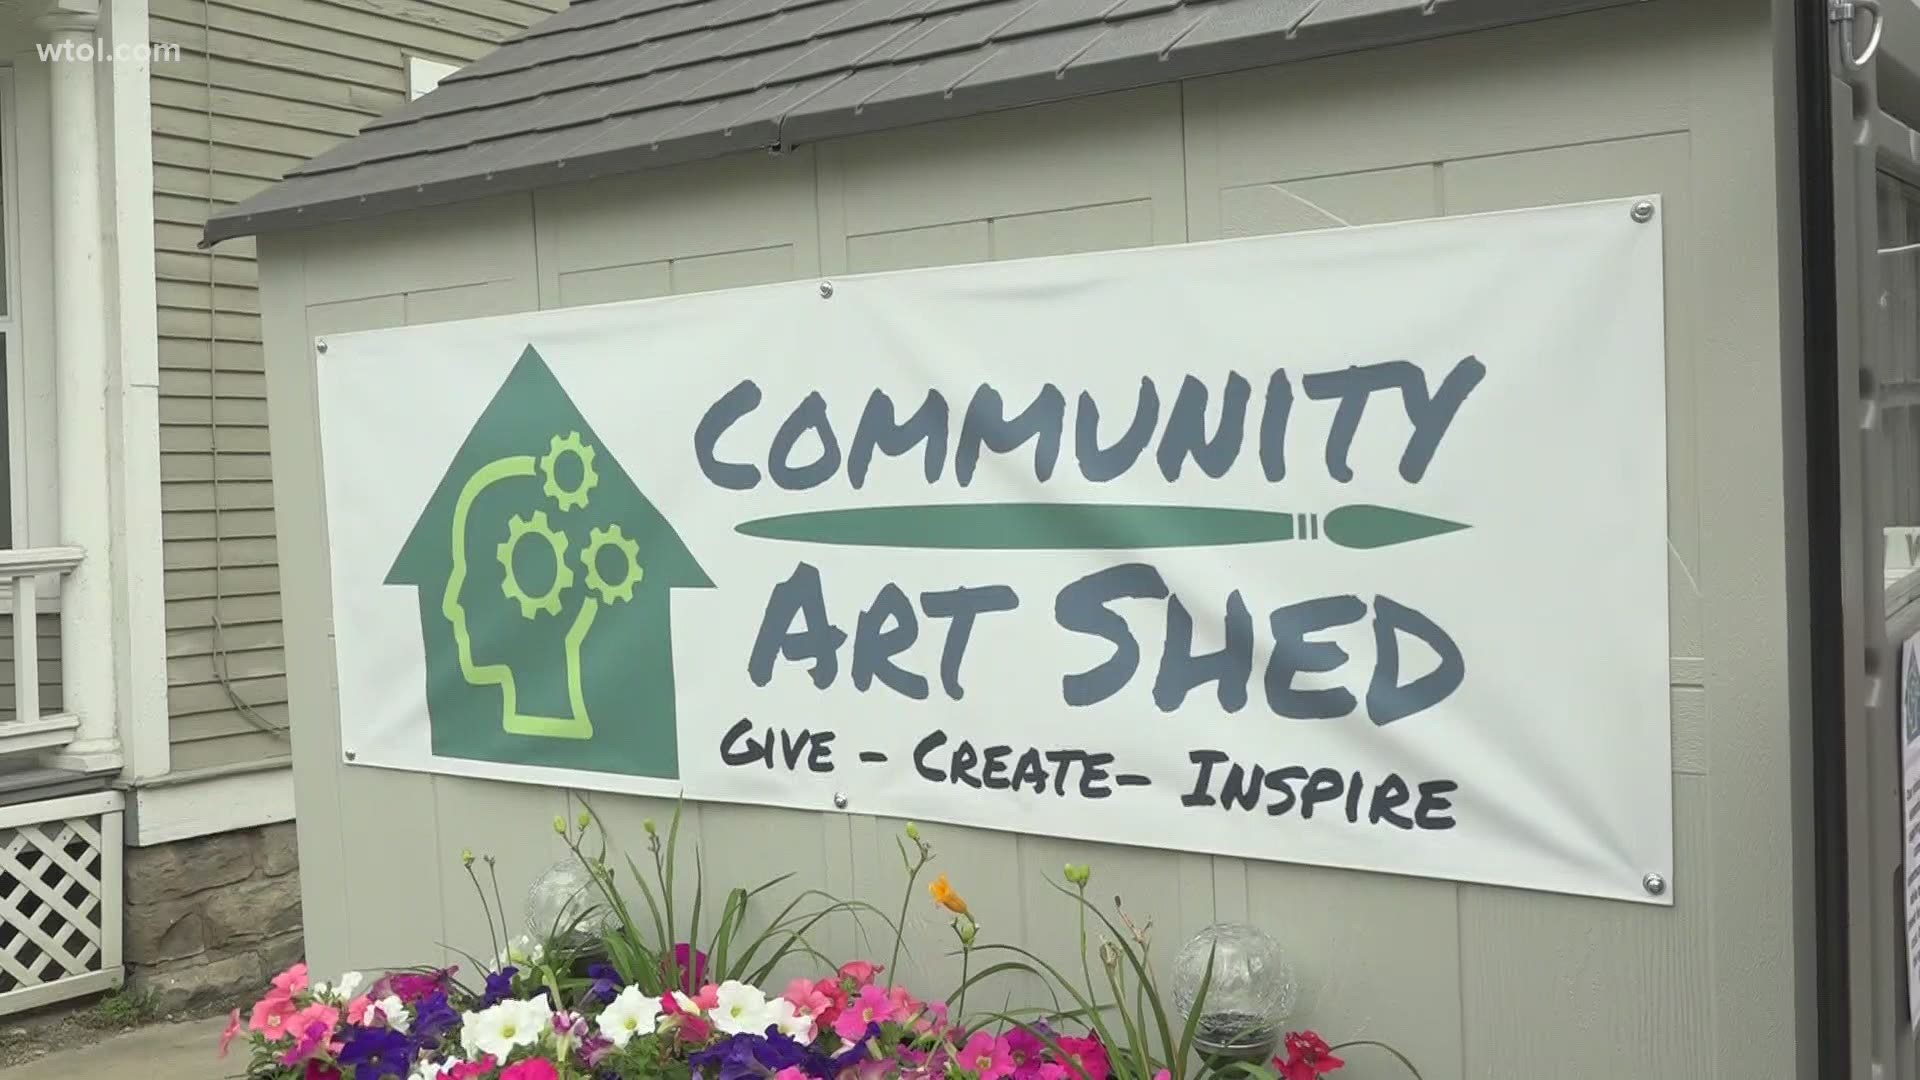 Free art supplies for community projects